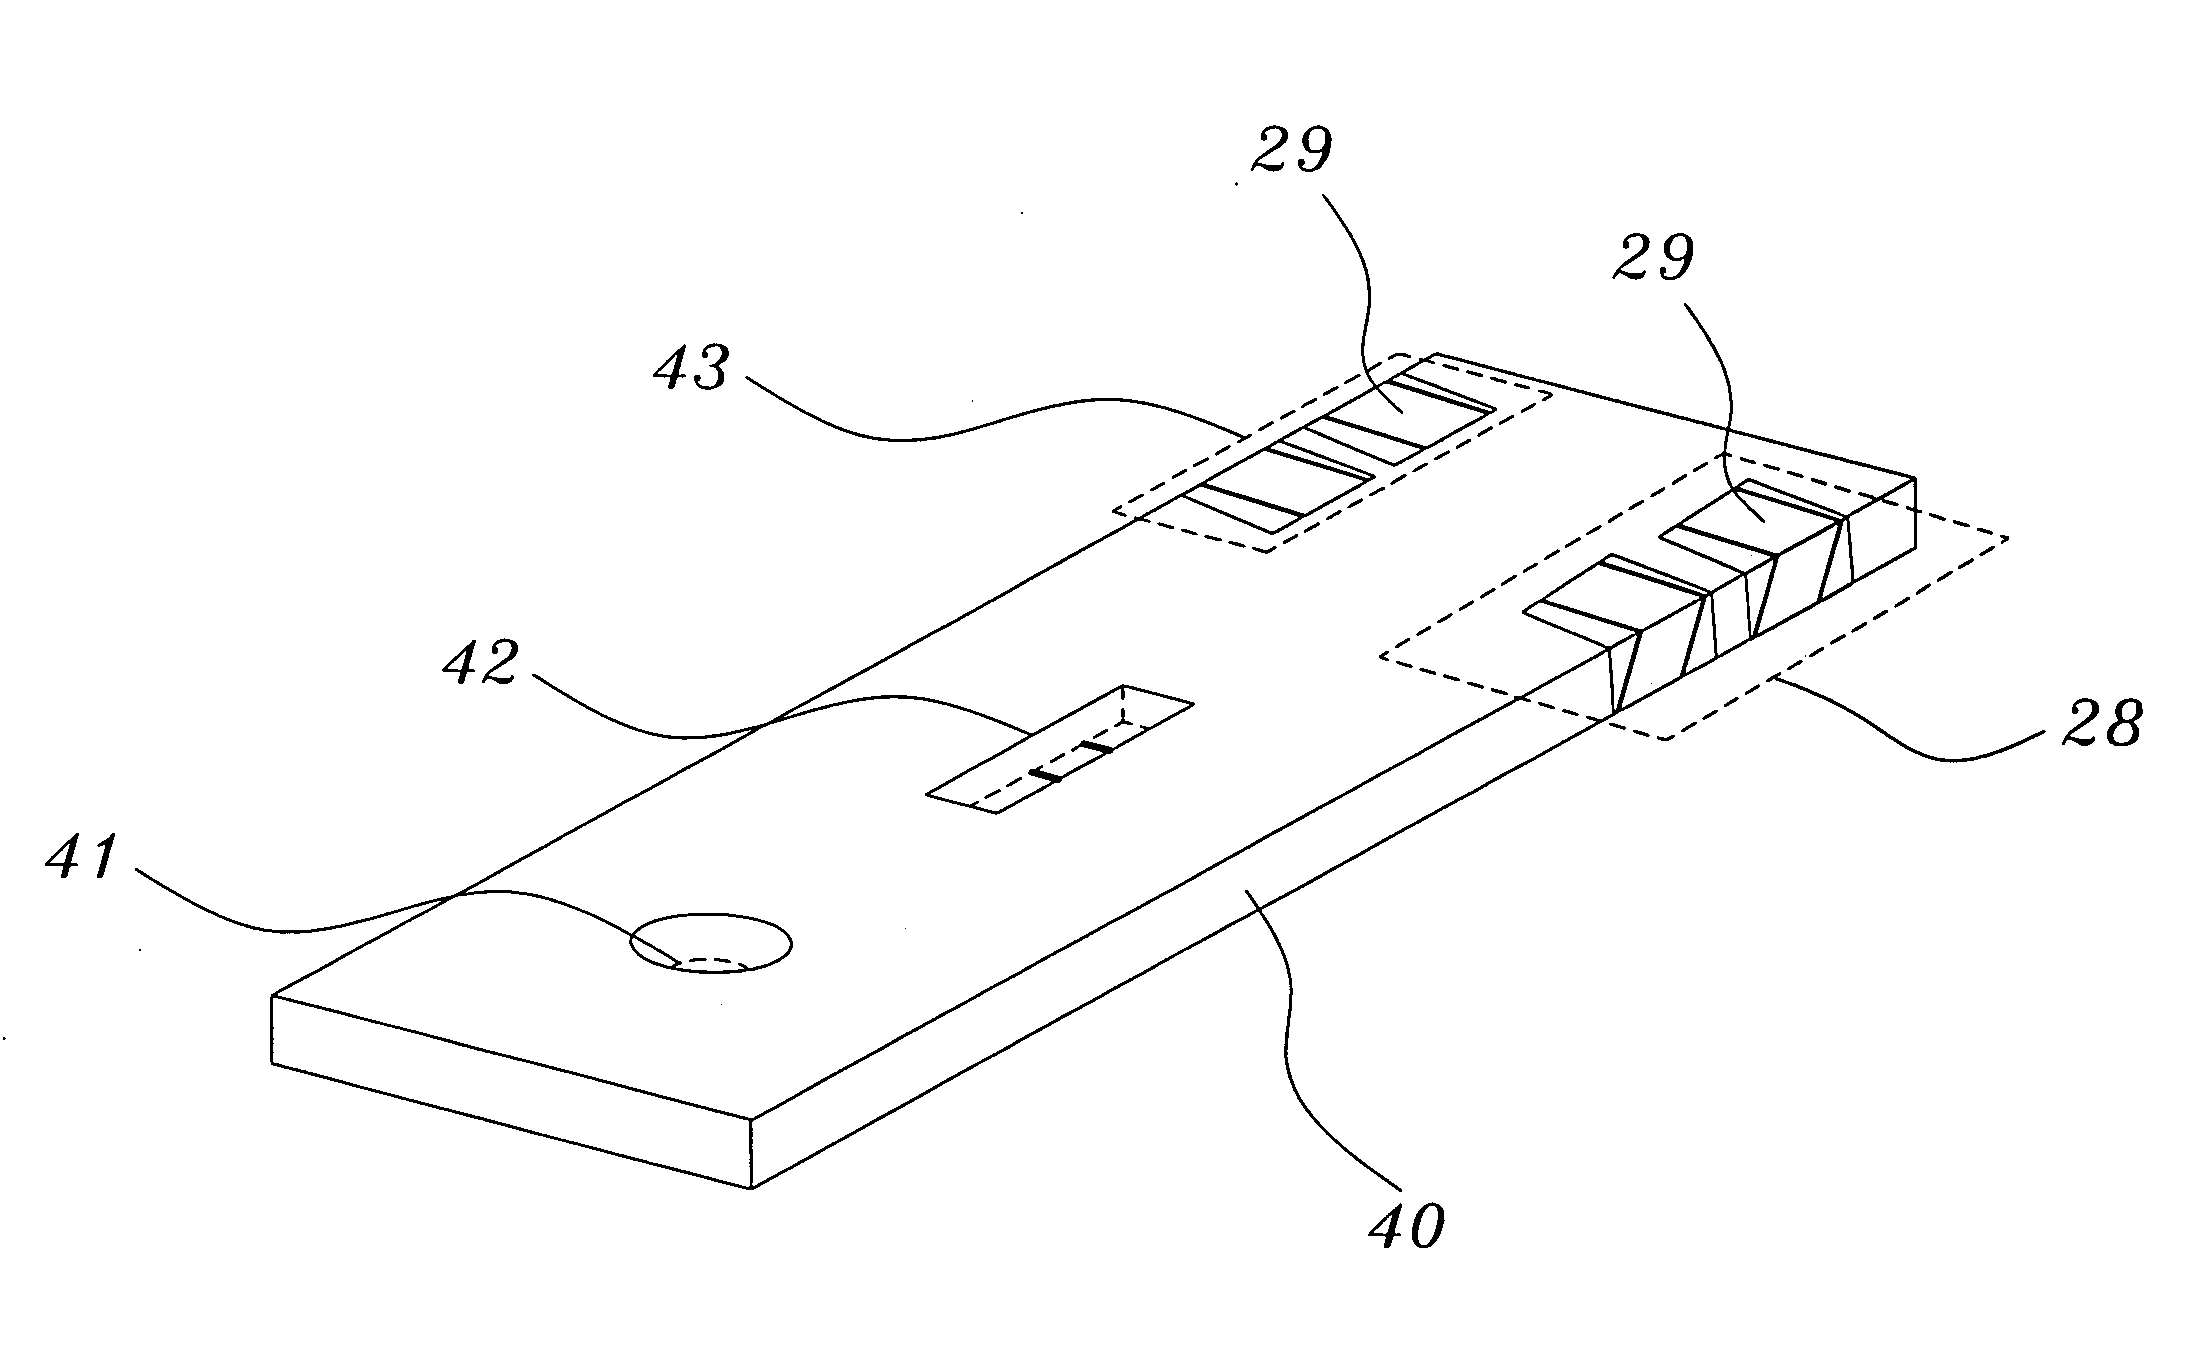 Test strip with optical identification patterns and test instrument using the same